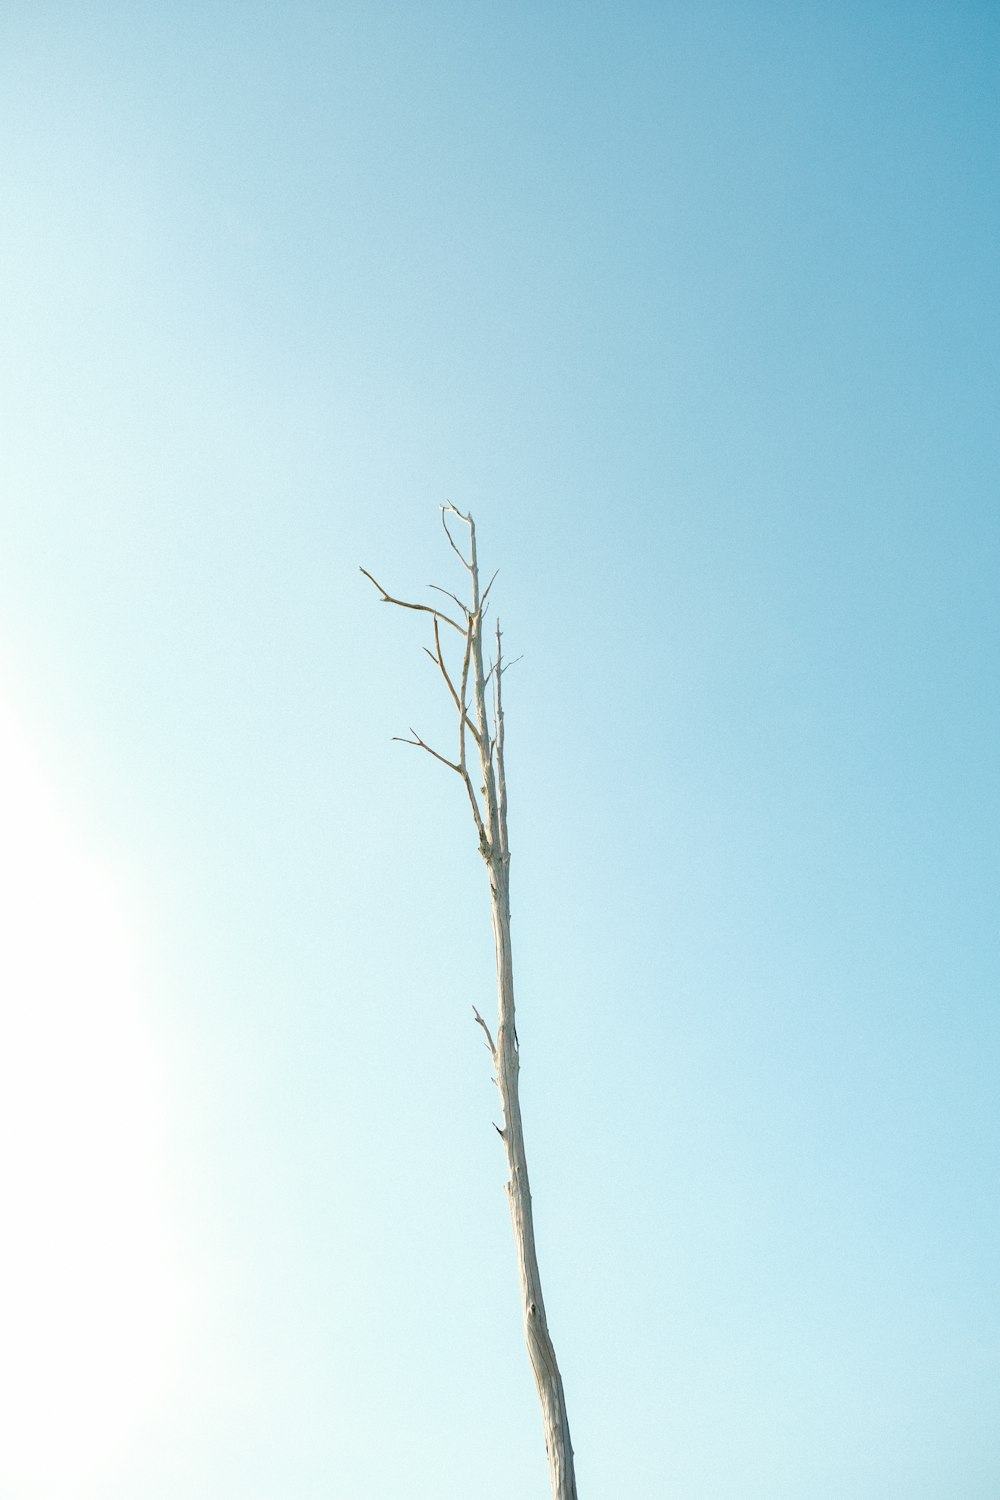 a dead tree in the middle of a field